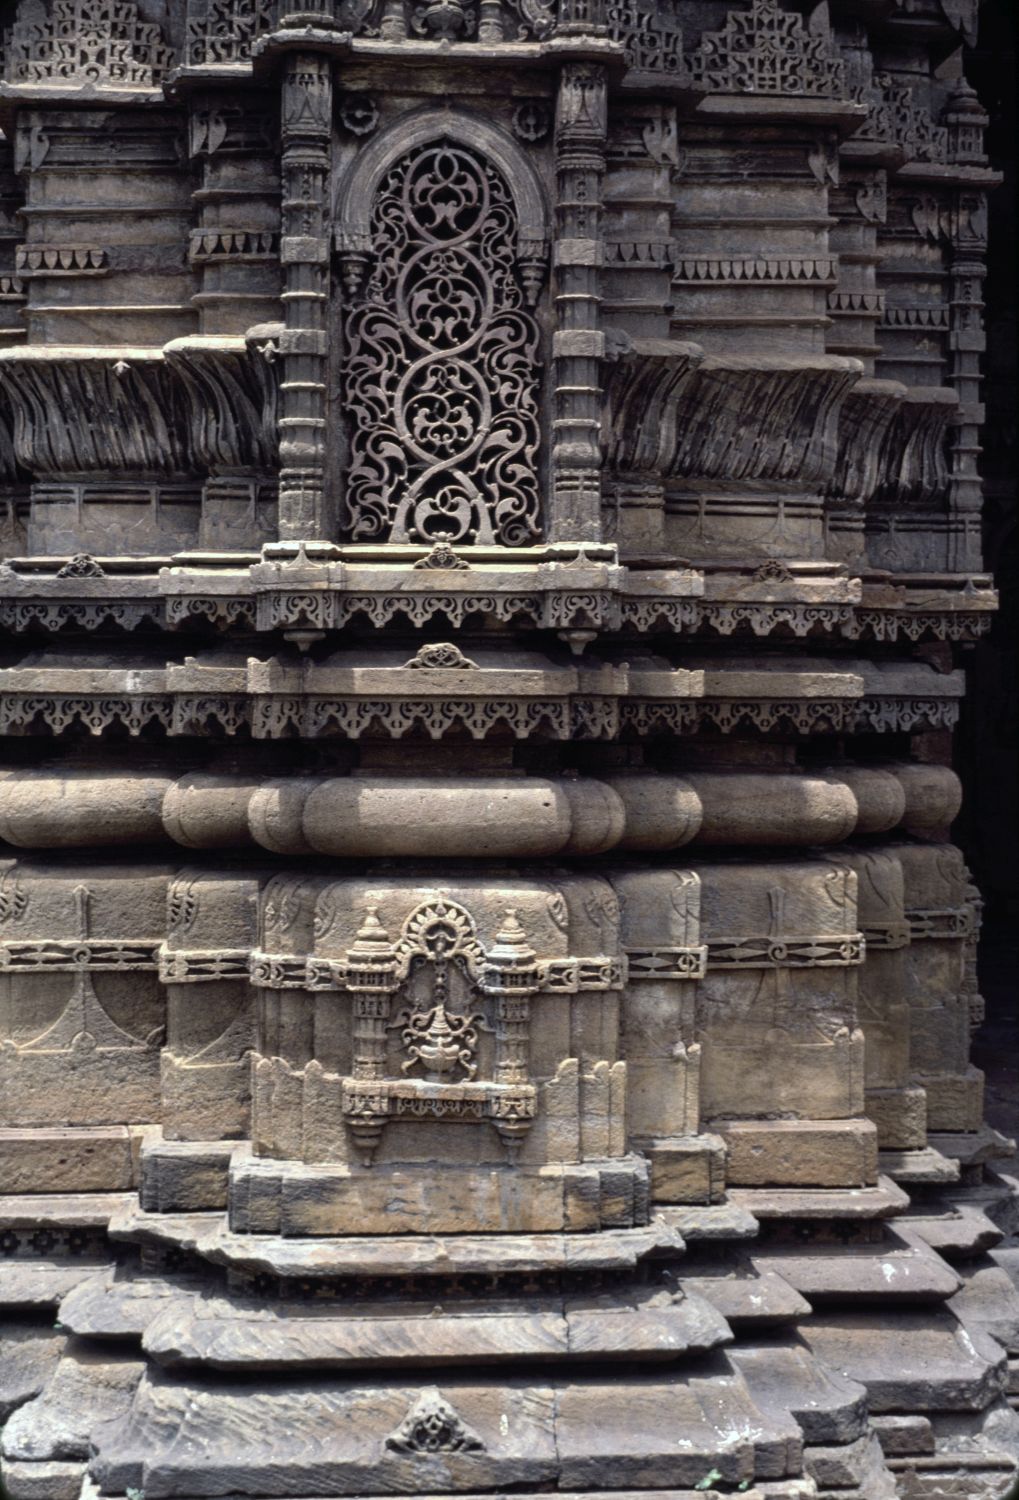 Detail view of minaret showing registers of carving and plaque with vine scroll motif.